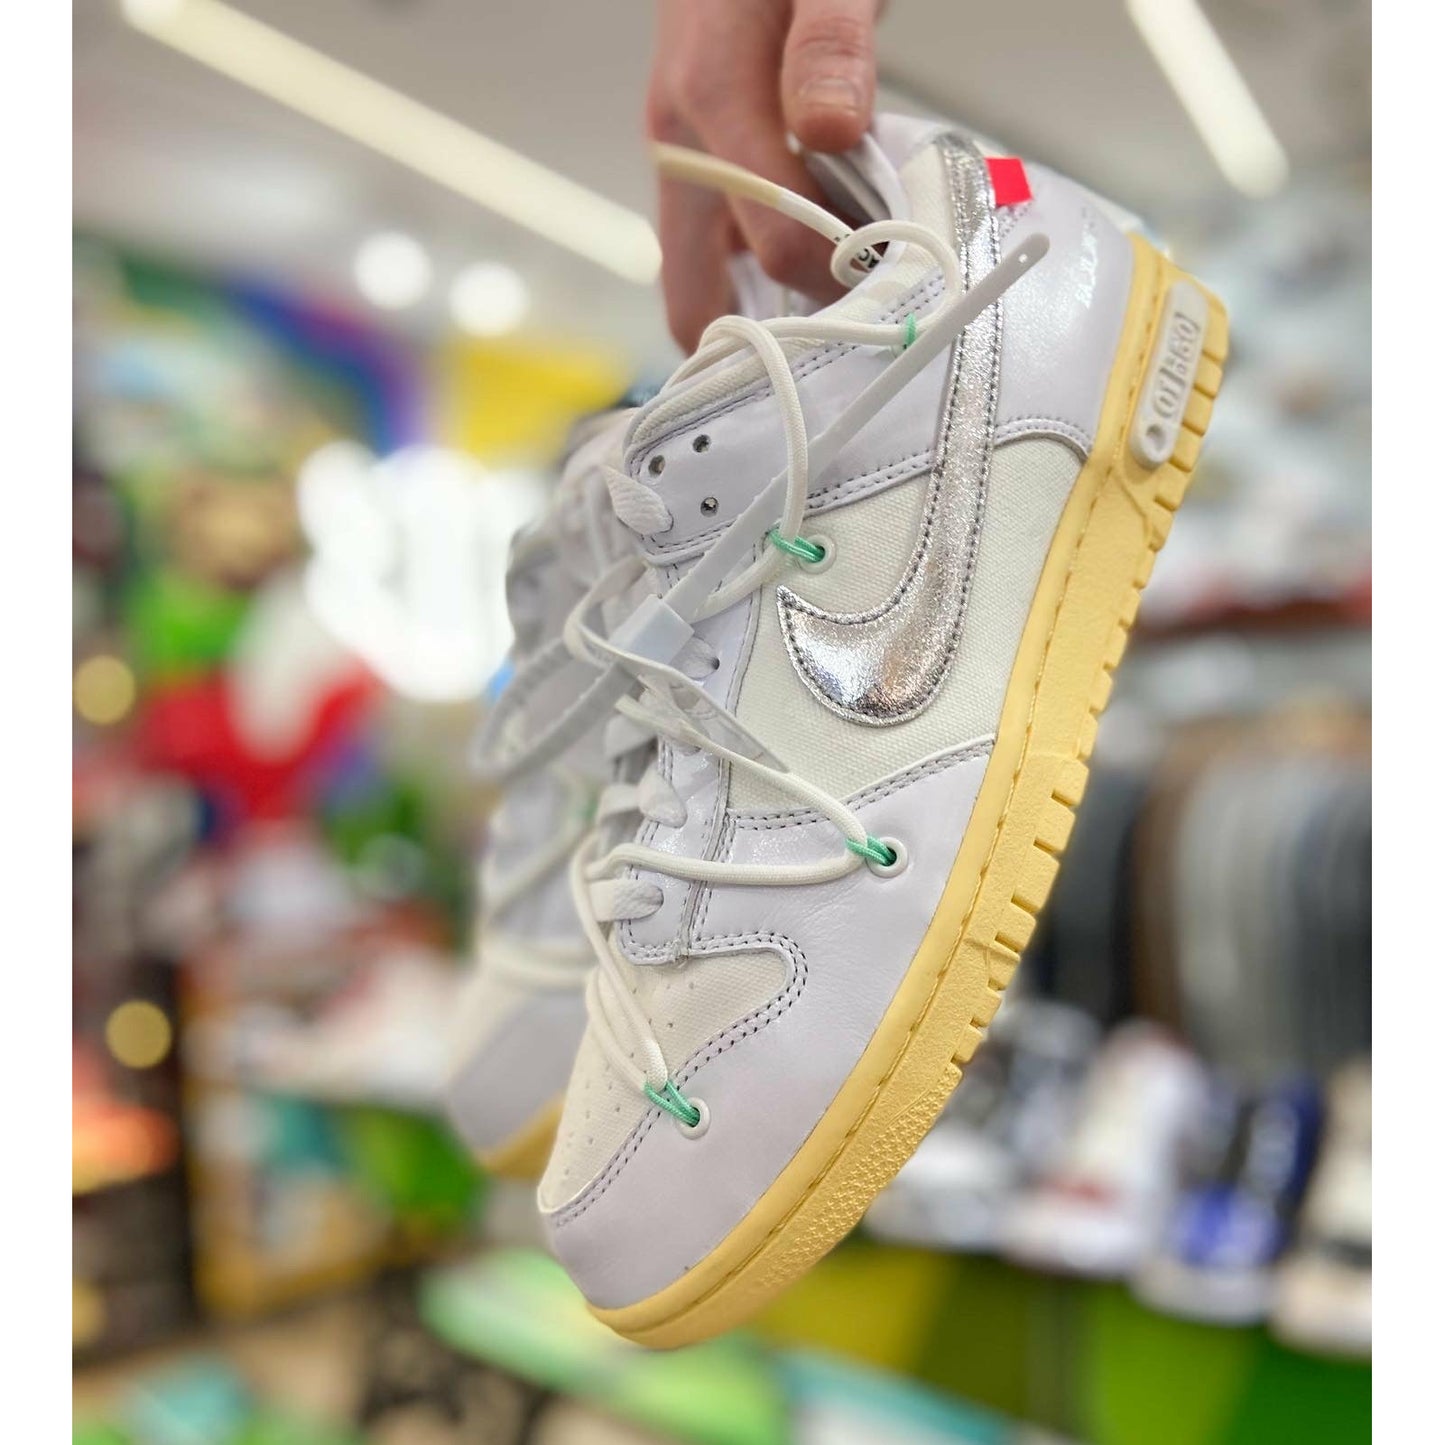 Nike Dunk Low Off-White Lot 1 by Nike from £945.00